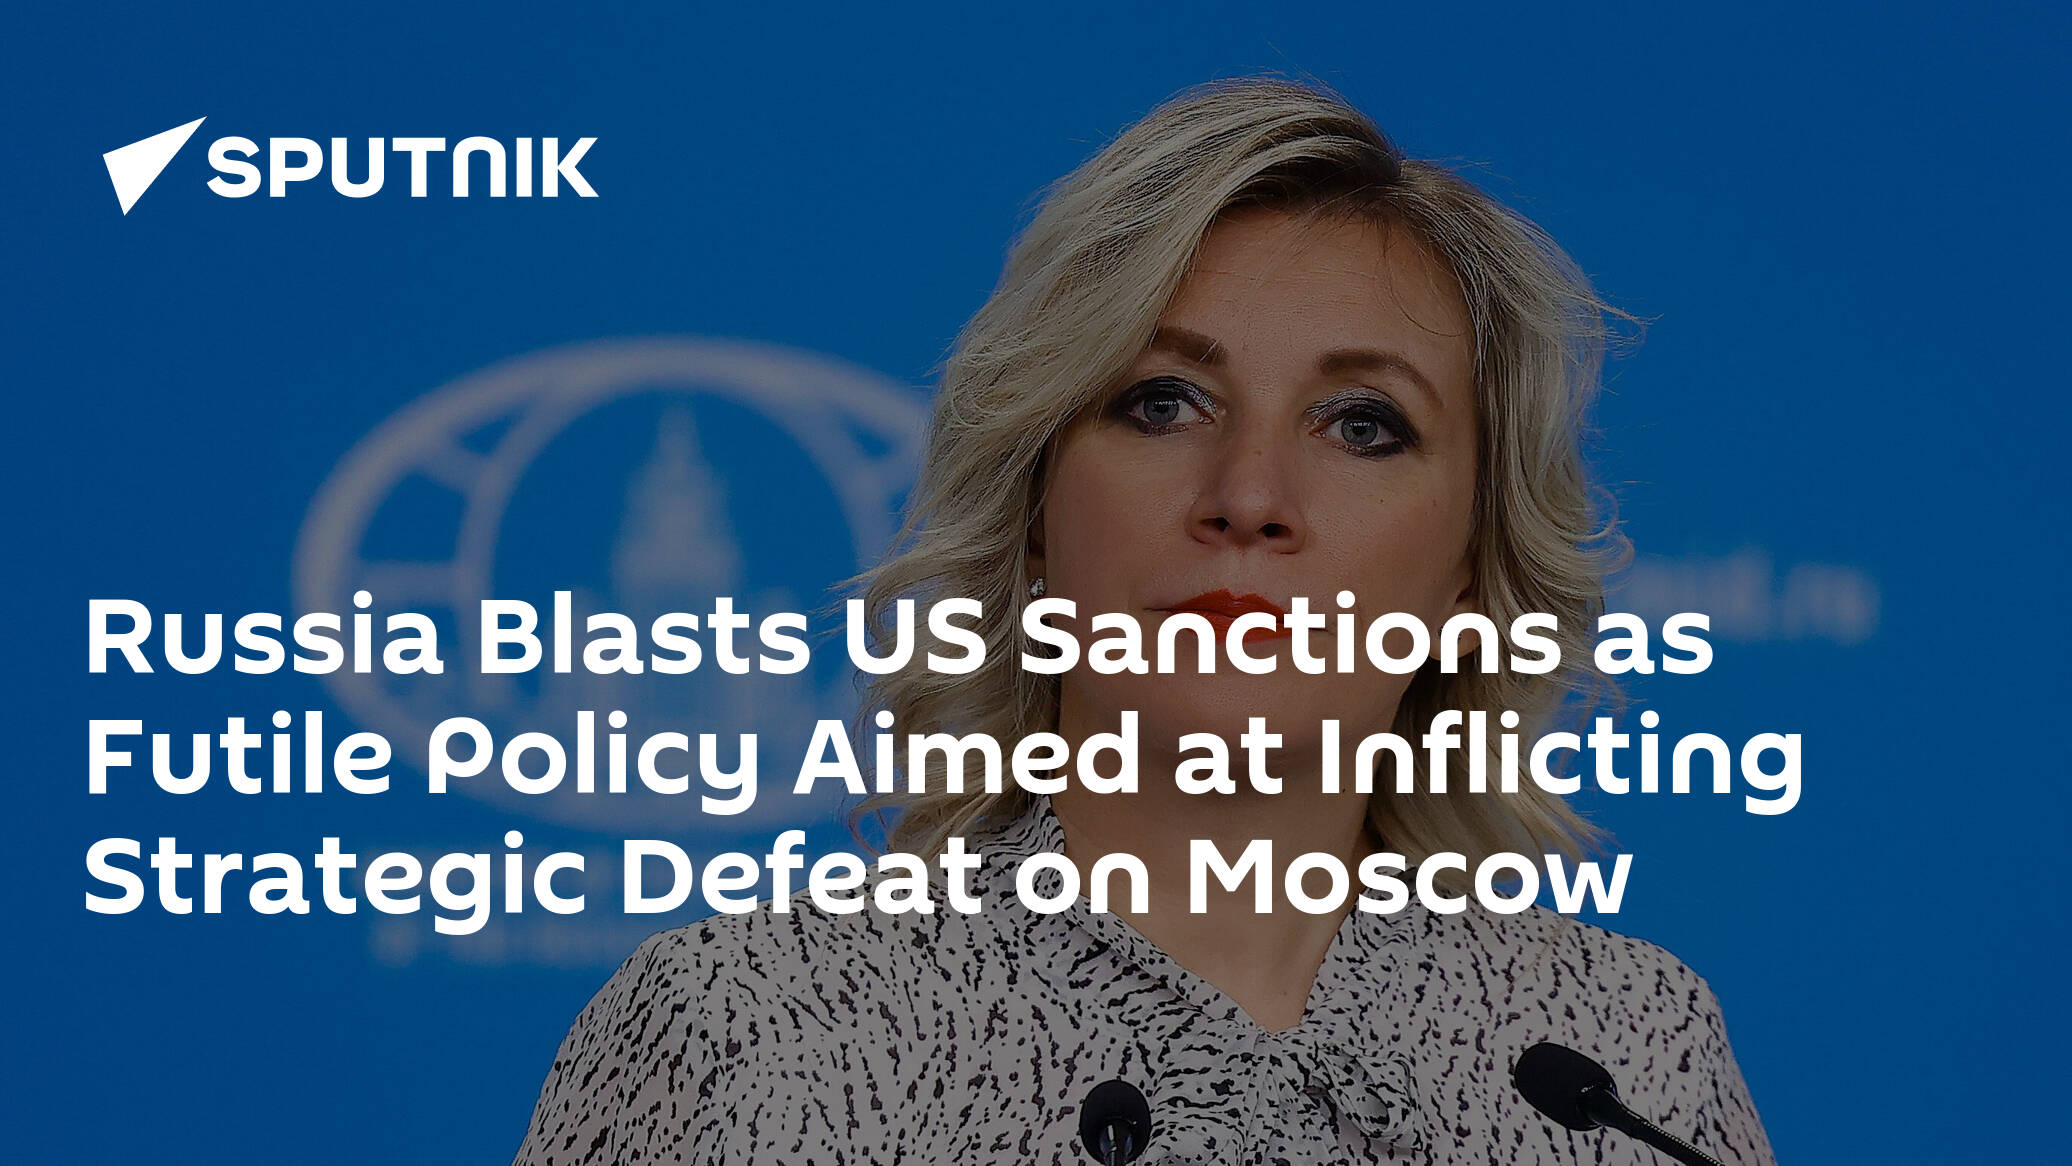 Russia Blasts US Sanctions as Futile Policy Aimed at Inflicting Strategic Defeat on Moscow